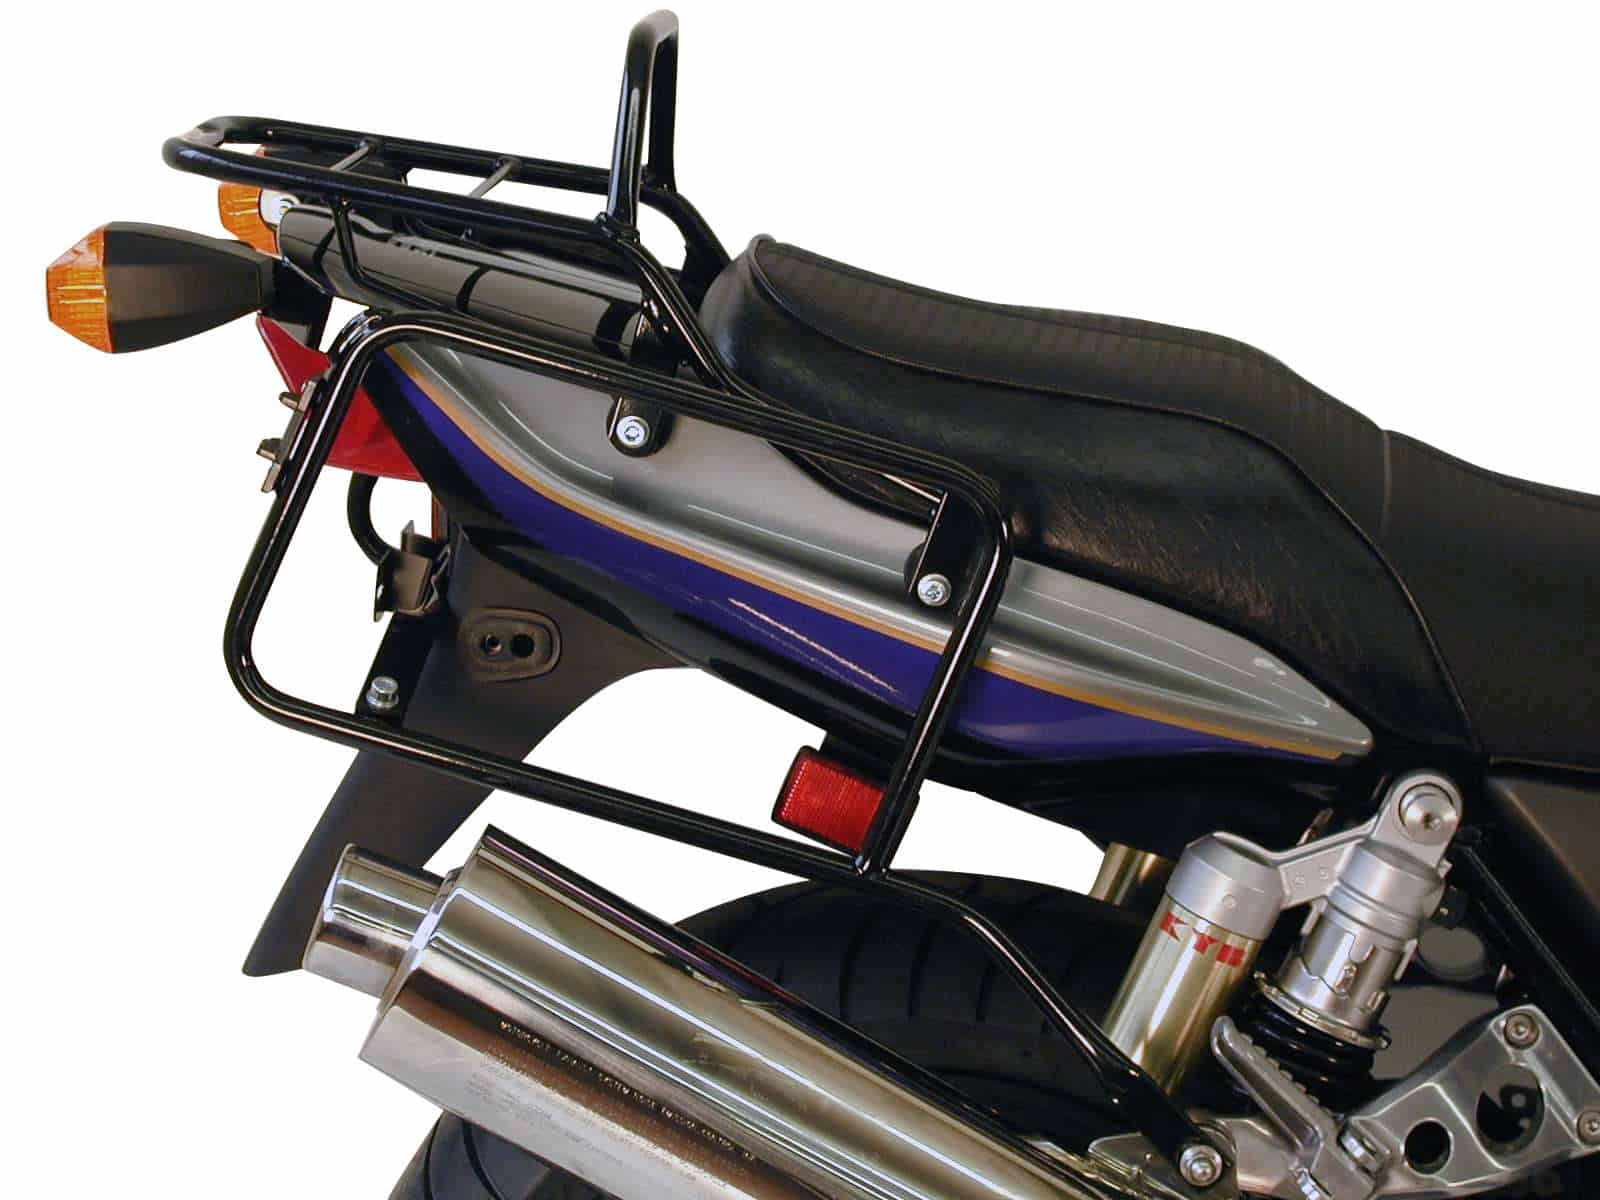 Sidecarrier permanent mounted black for Kawasaki ZRX 1200 R/S (2001-2007)